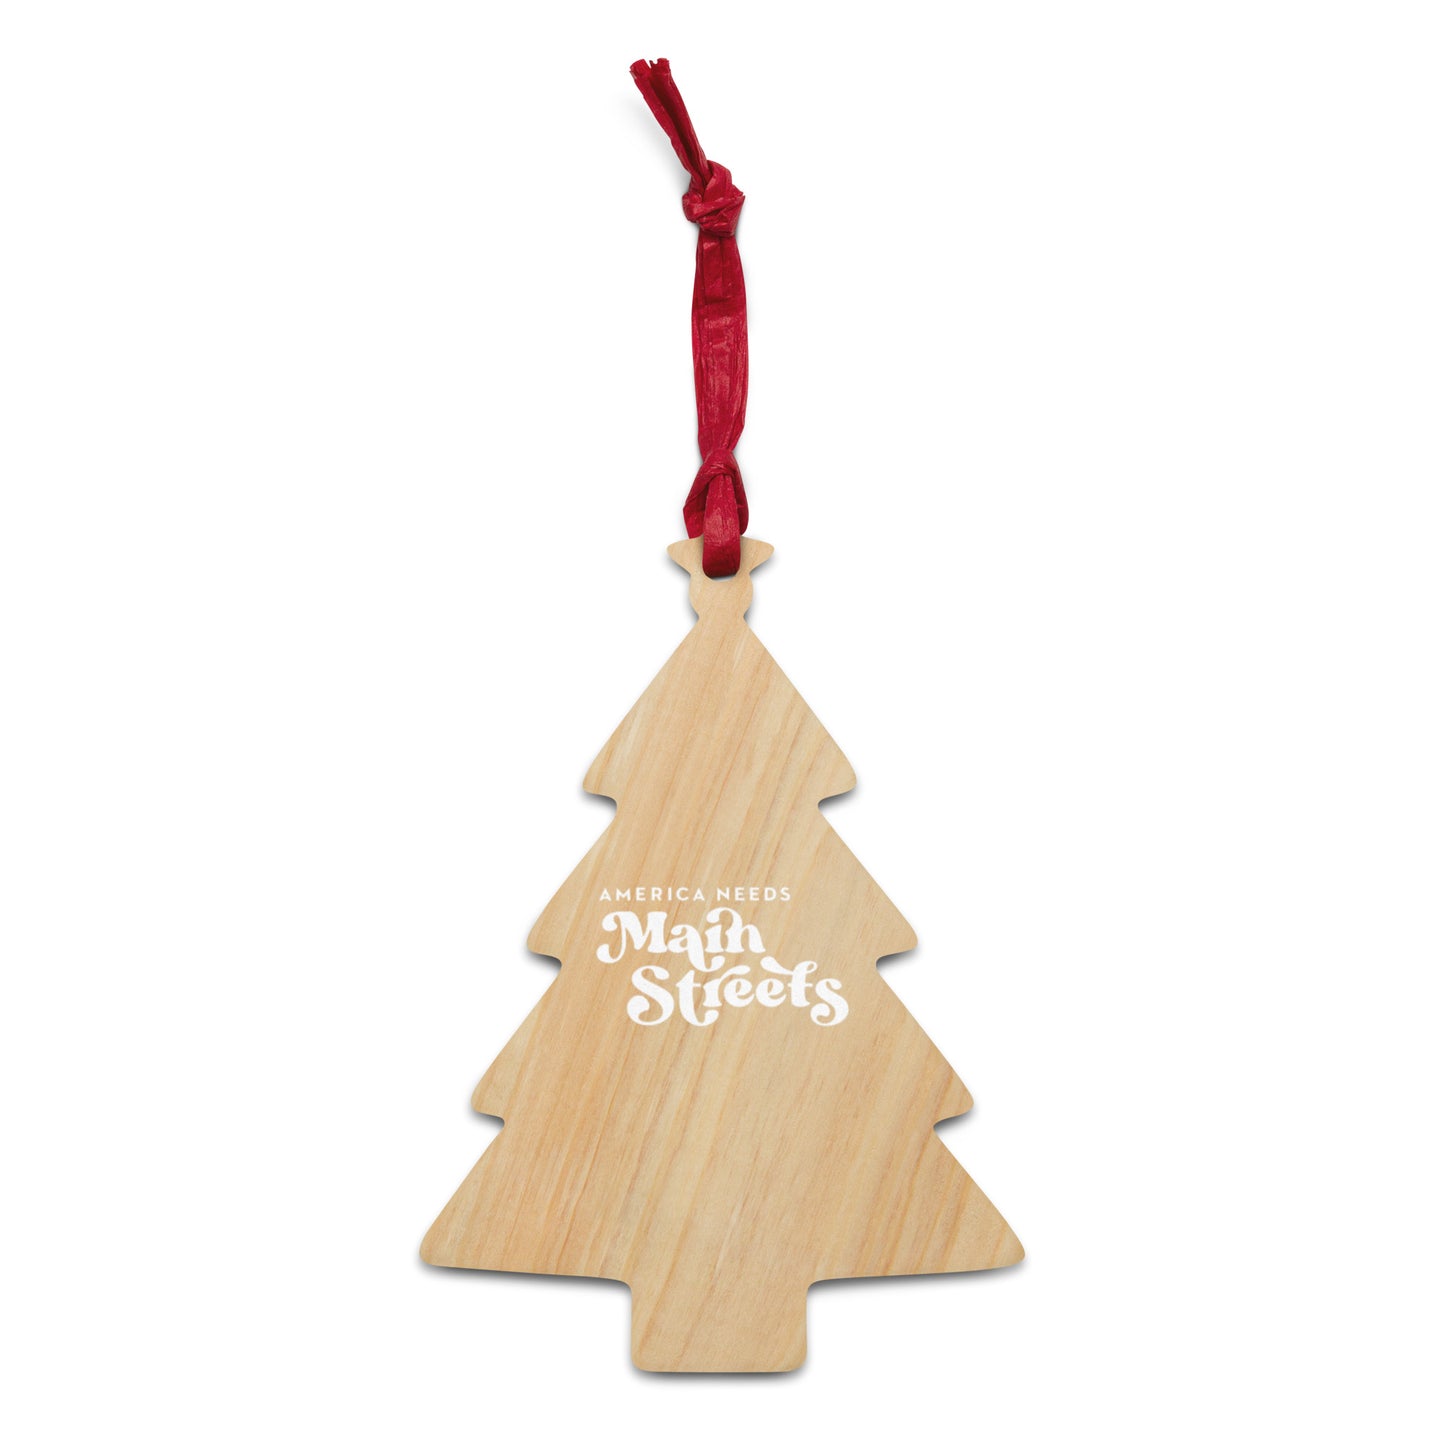 "America Needs Main Streets" Wooden Ornaments